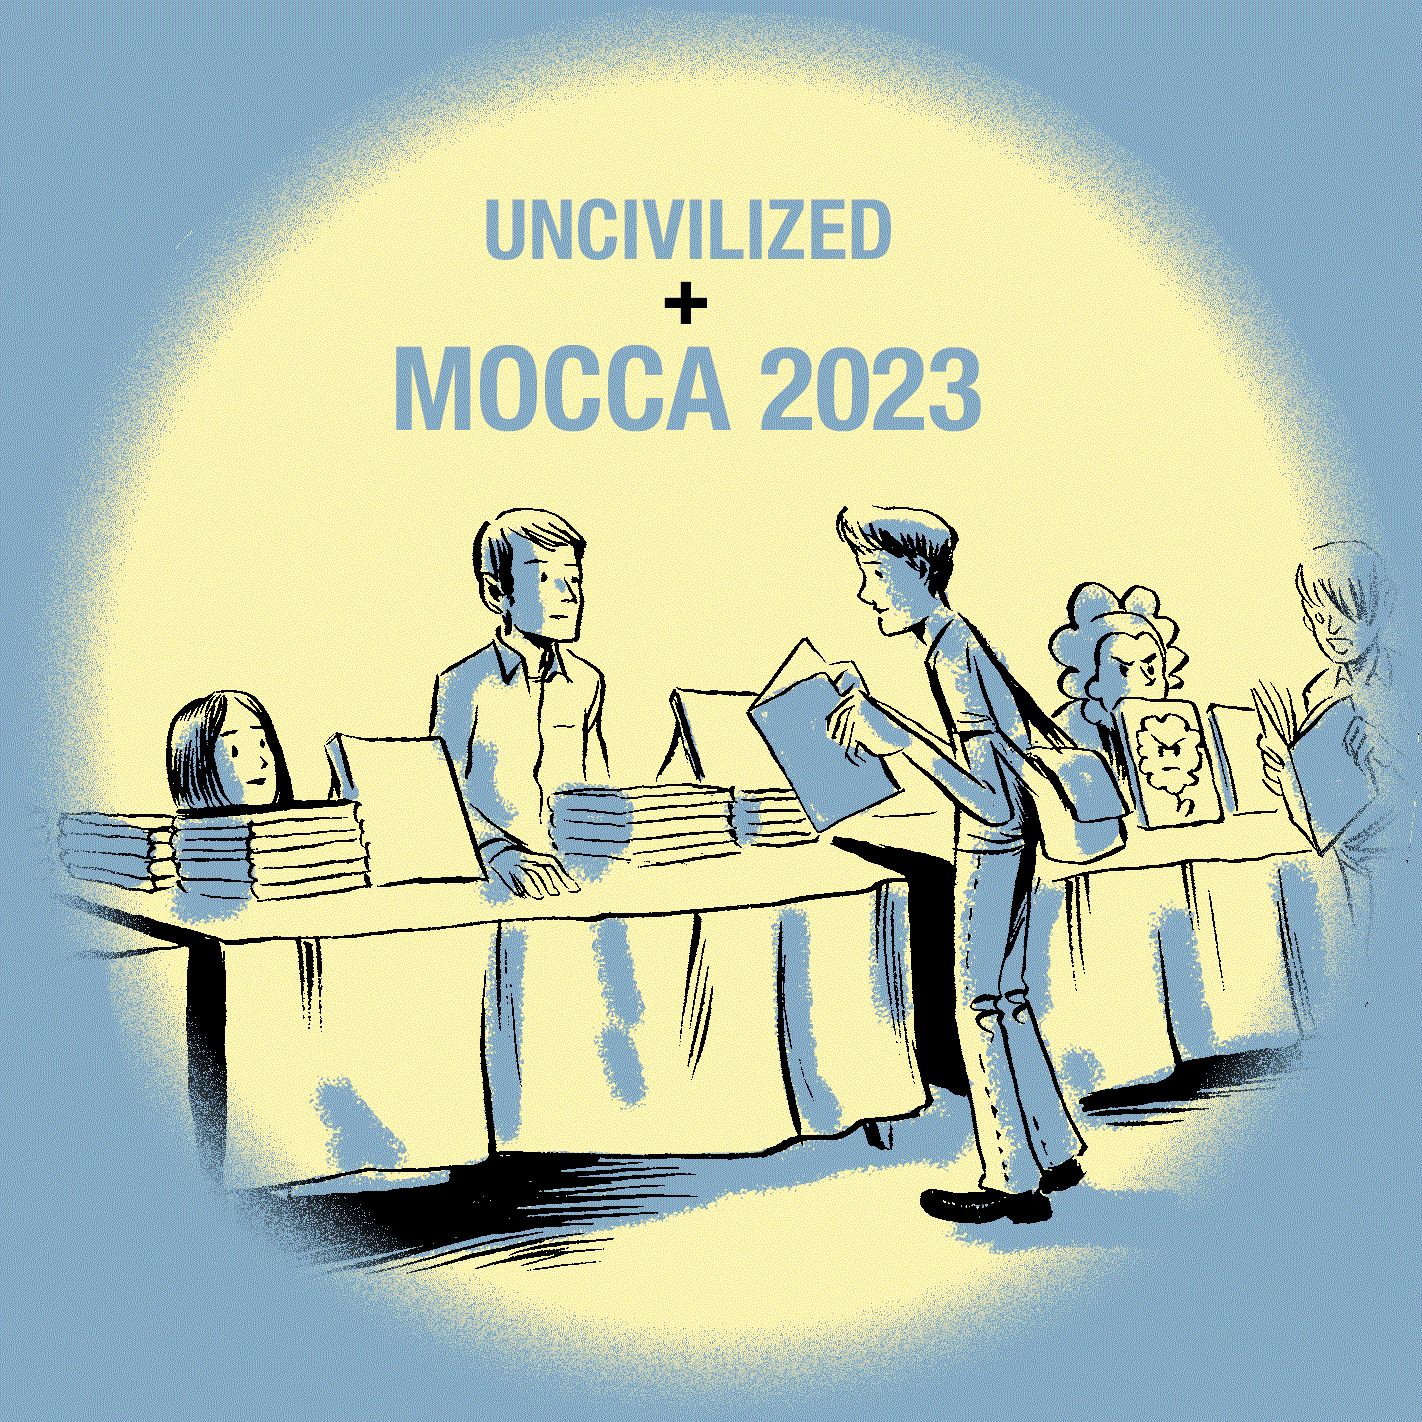 Uncivilized At MoCCA 2023